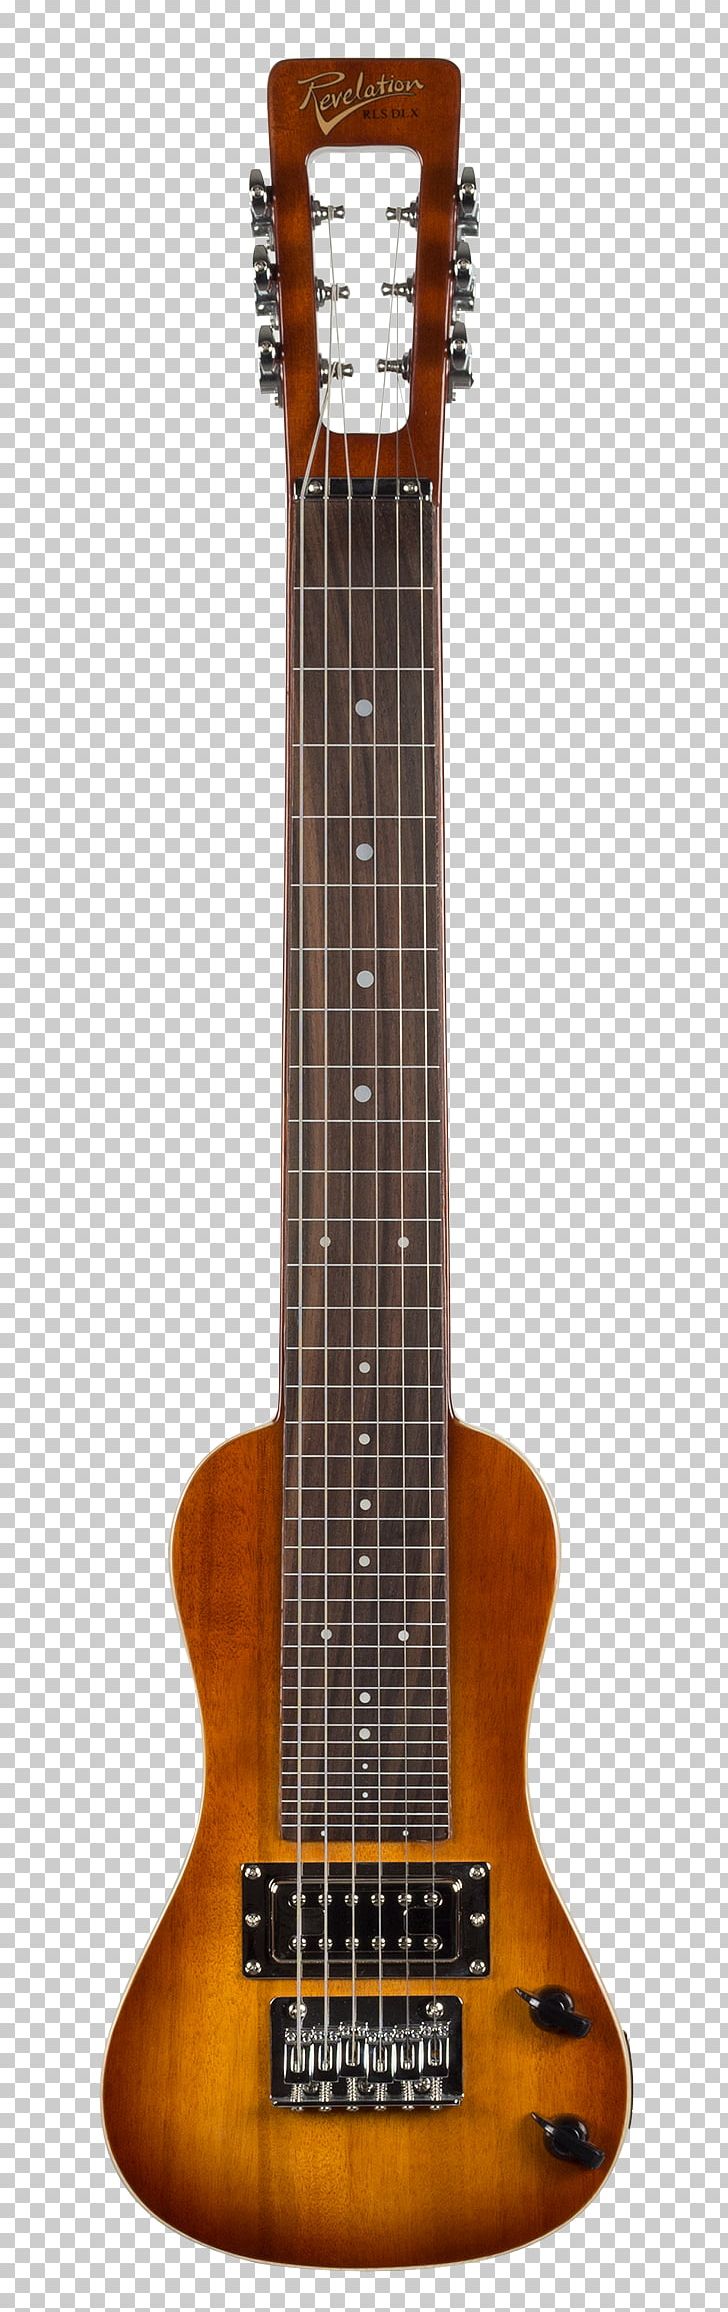 Steel Guitar Musical Instruments String Instruments Bass Guitar PNG, Clipart, Acoustic Electric Guitar, Guitar Accessory, Neck, Objects, Plucked String Instrument Free PNG Download